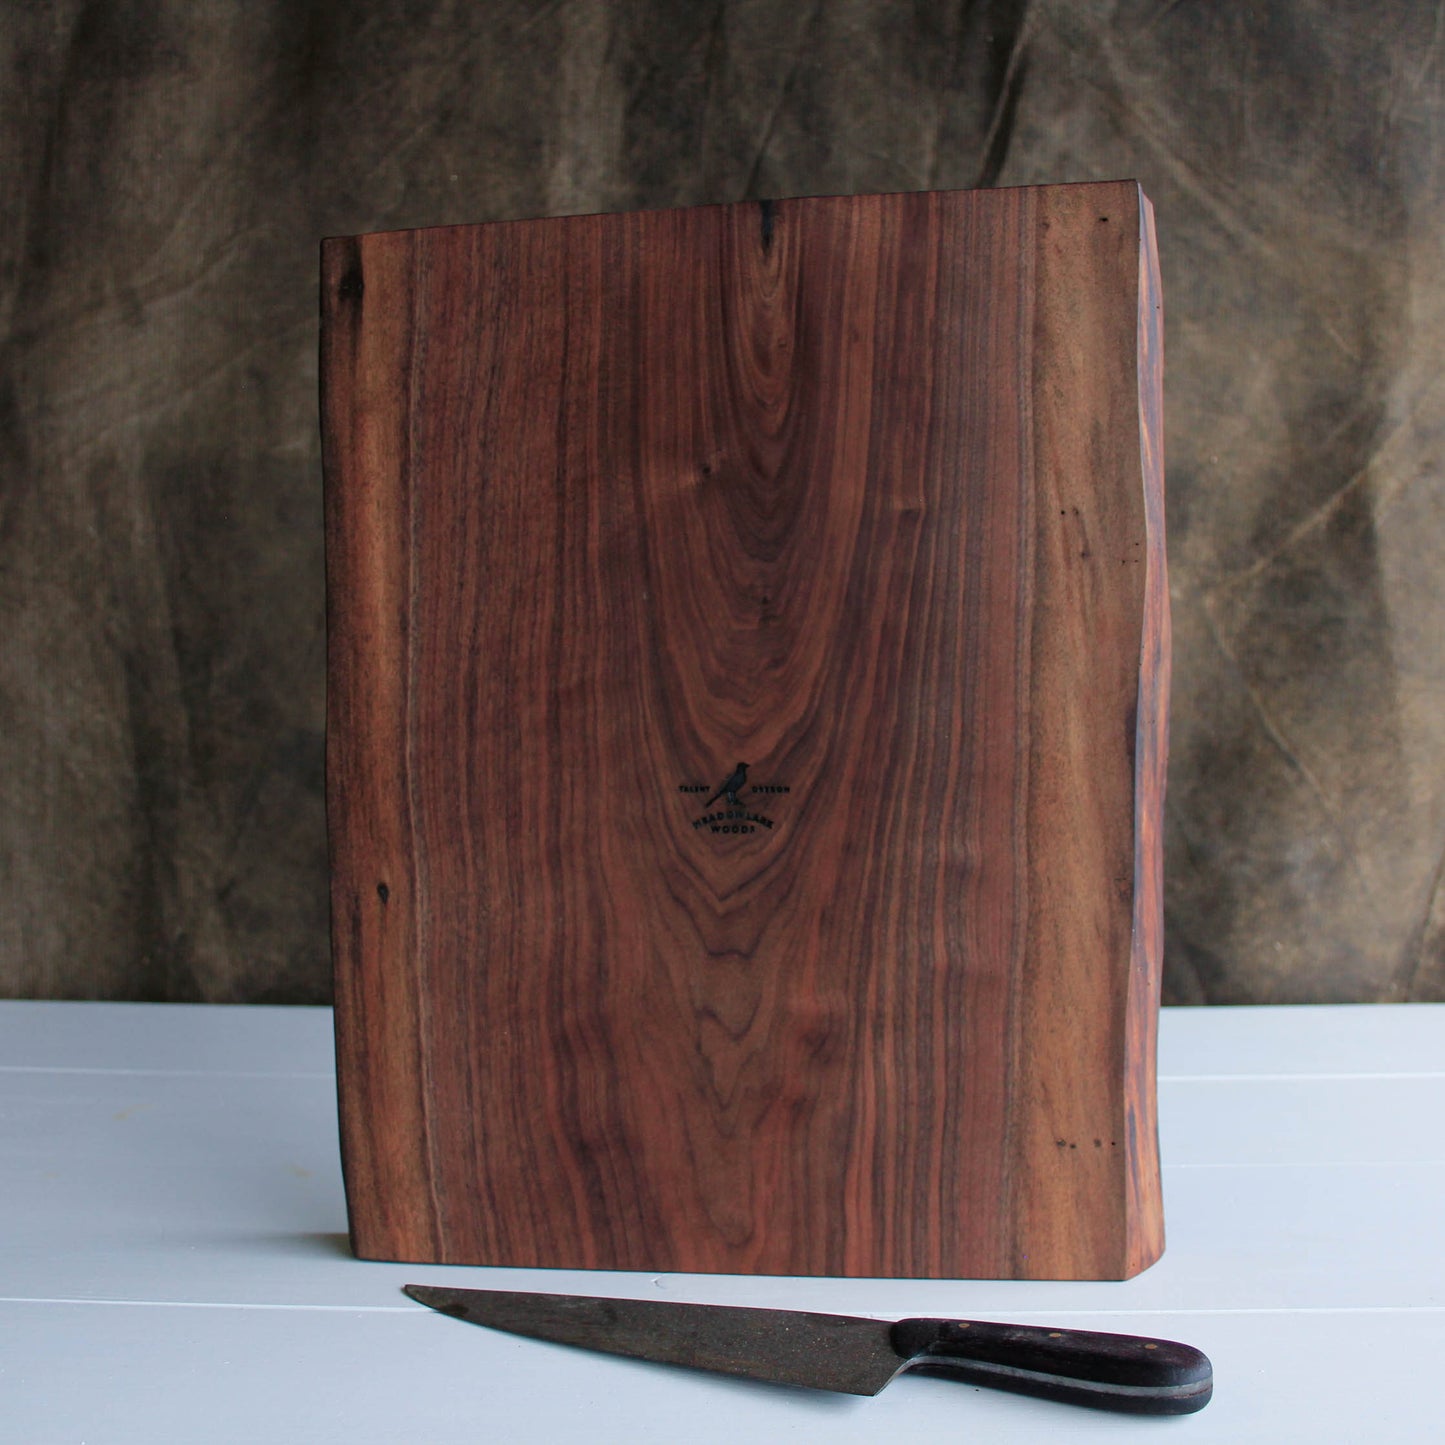 A Picture of a figured walnut cutting board with two live edges and a logo of the meadowlark bird standing in front of a kitchen knife